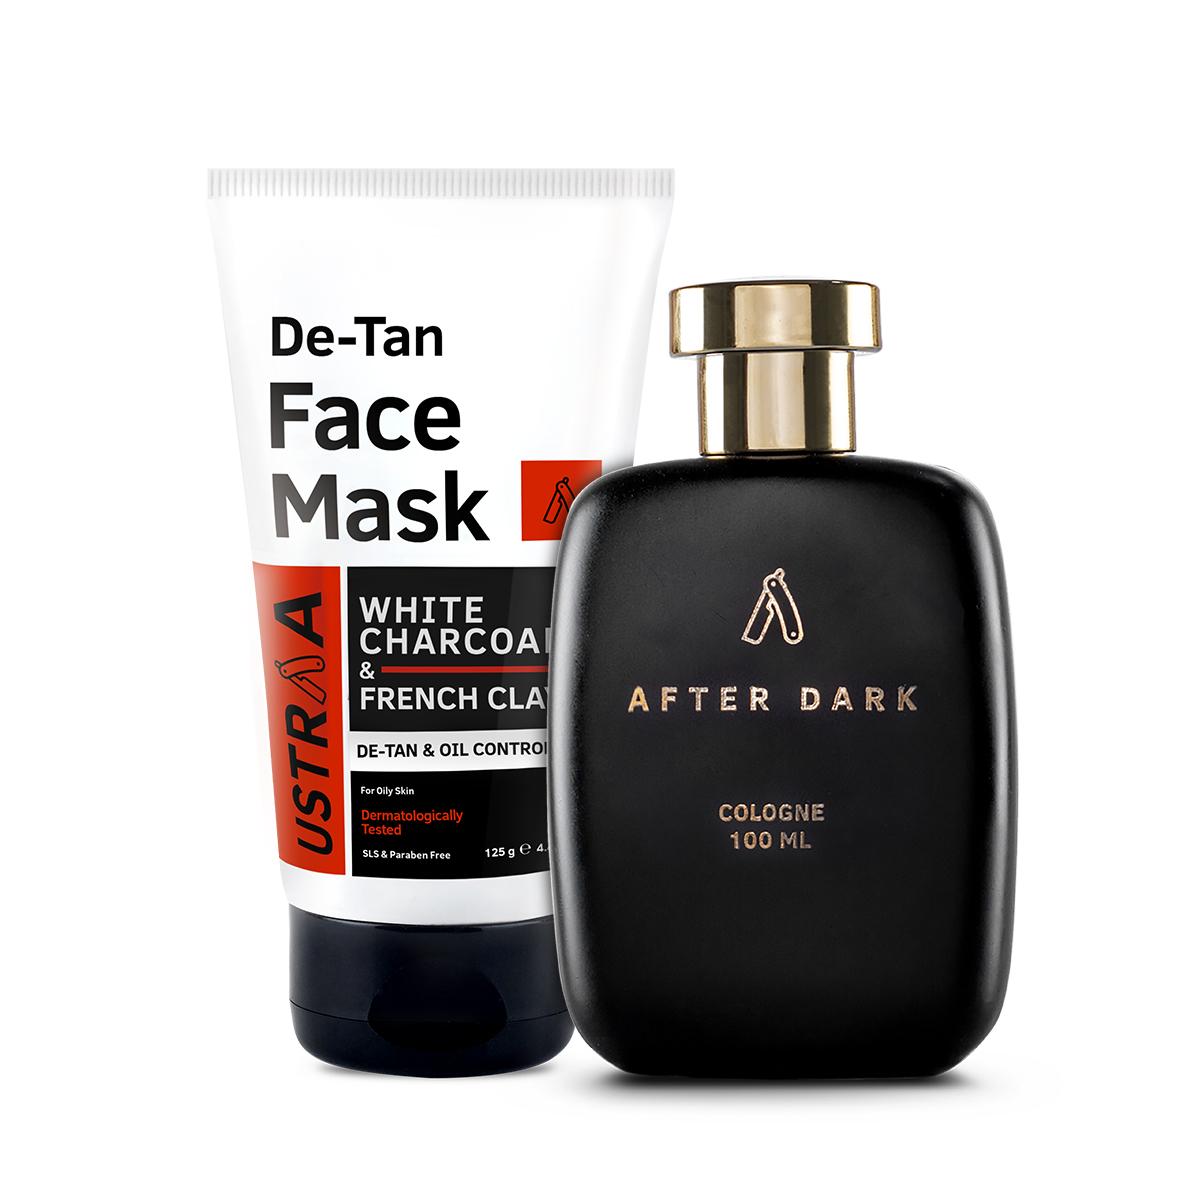 Face Mask - Oily Skin & After Dark Cologne - 100 ml - Perfume for Men